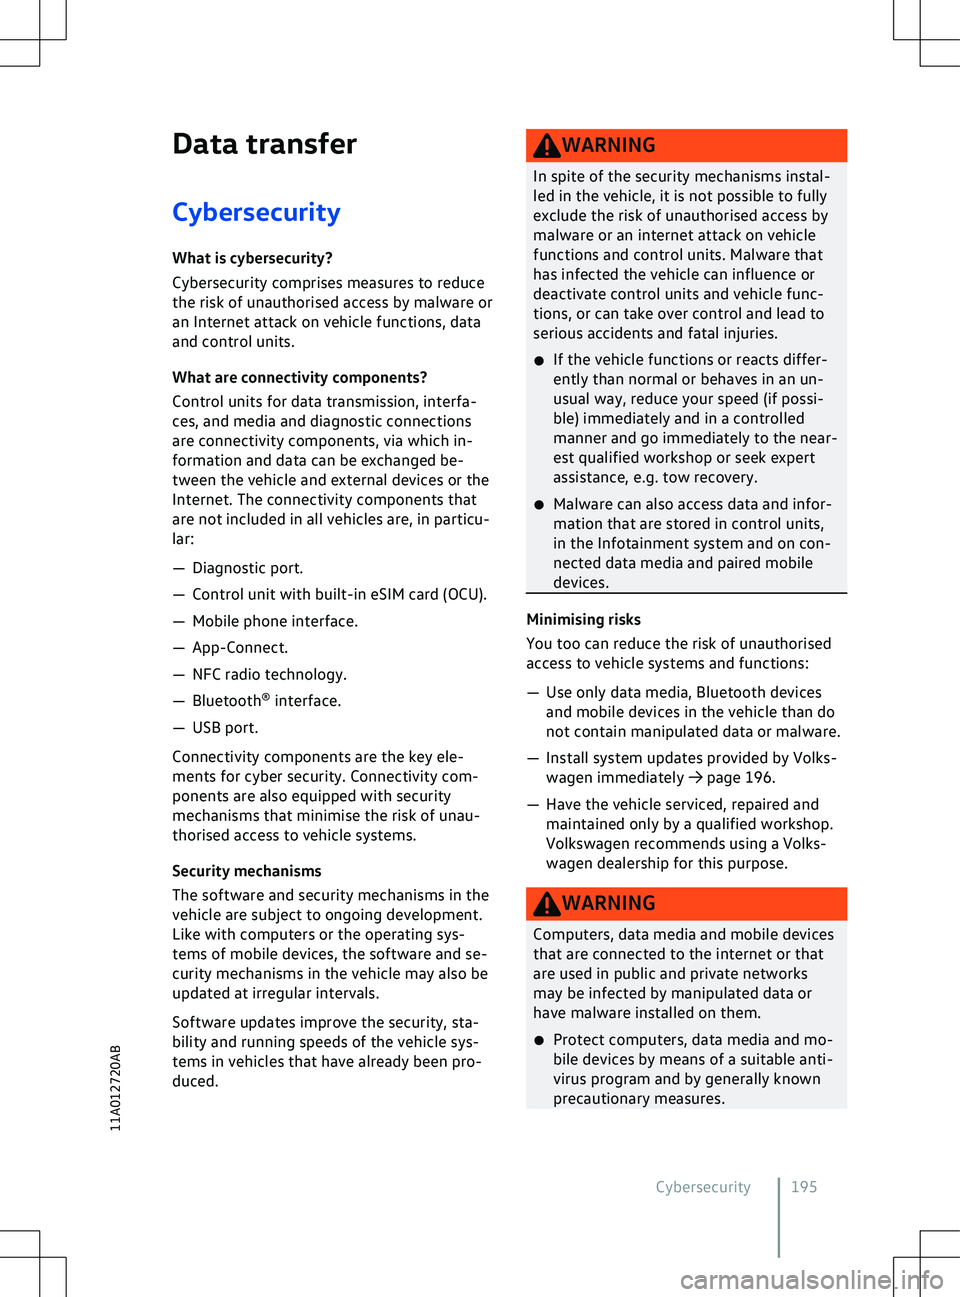 VOLKSWAGEN ID.4 2021  Owners Manual Data transfer
CybersecurityWhat is cybersecurity?
Cybersecurity comprises measures to reduce
the risk of unauthorised access by malware or
an Internet attack on v
ehicle functions, data
and control un